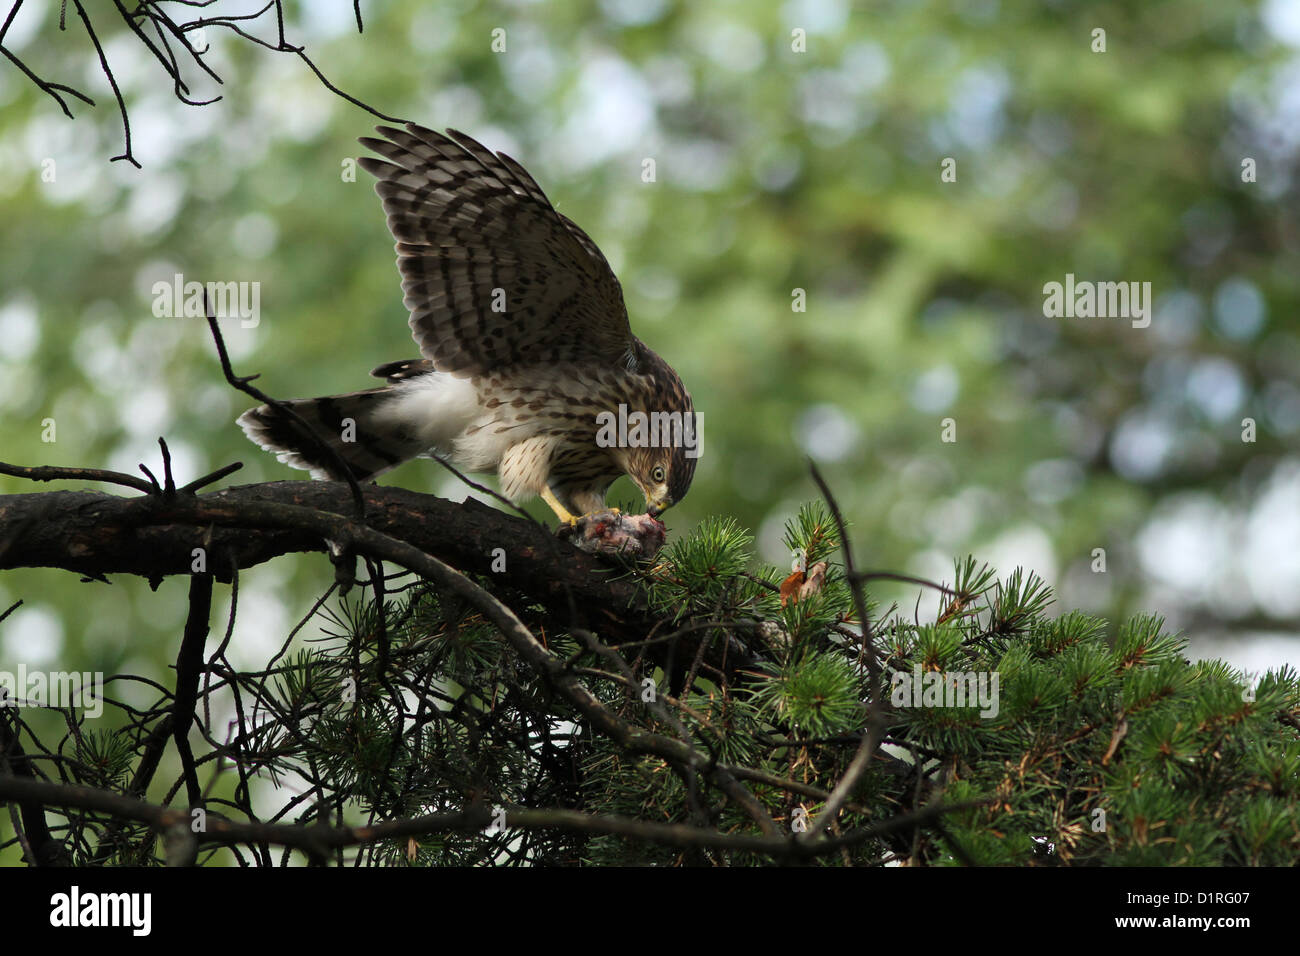 Juveniles Cooper's hawk (Accipiter cooperii) take a meal. Stock Photo